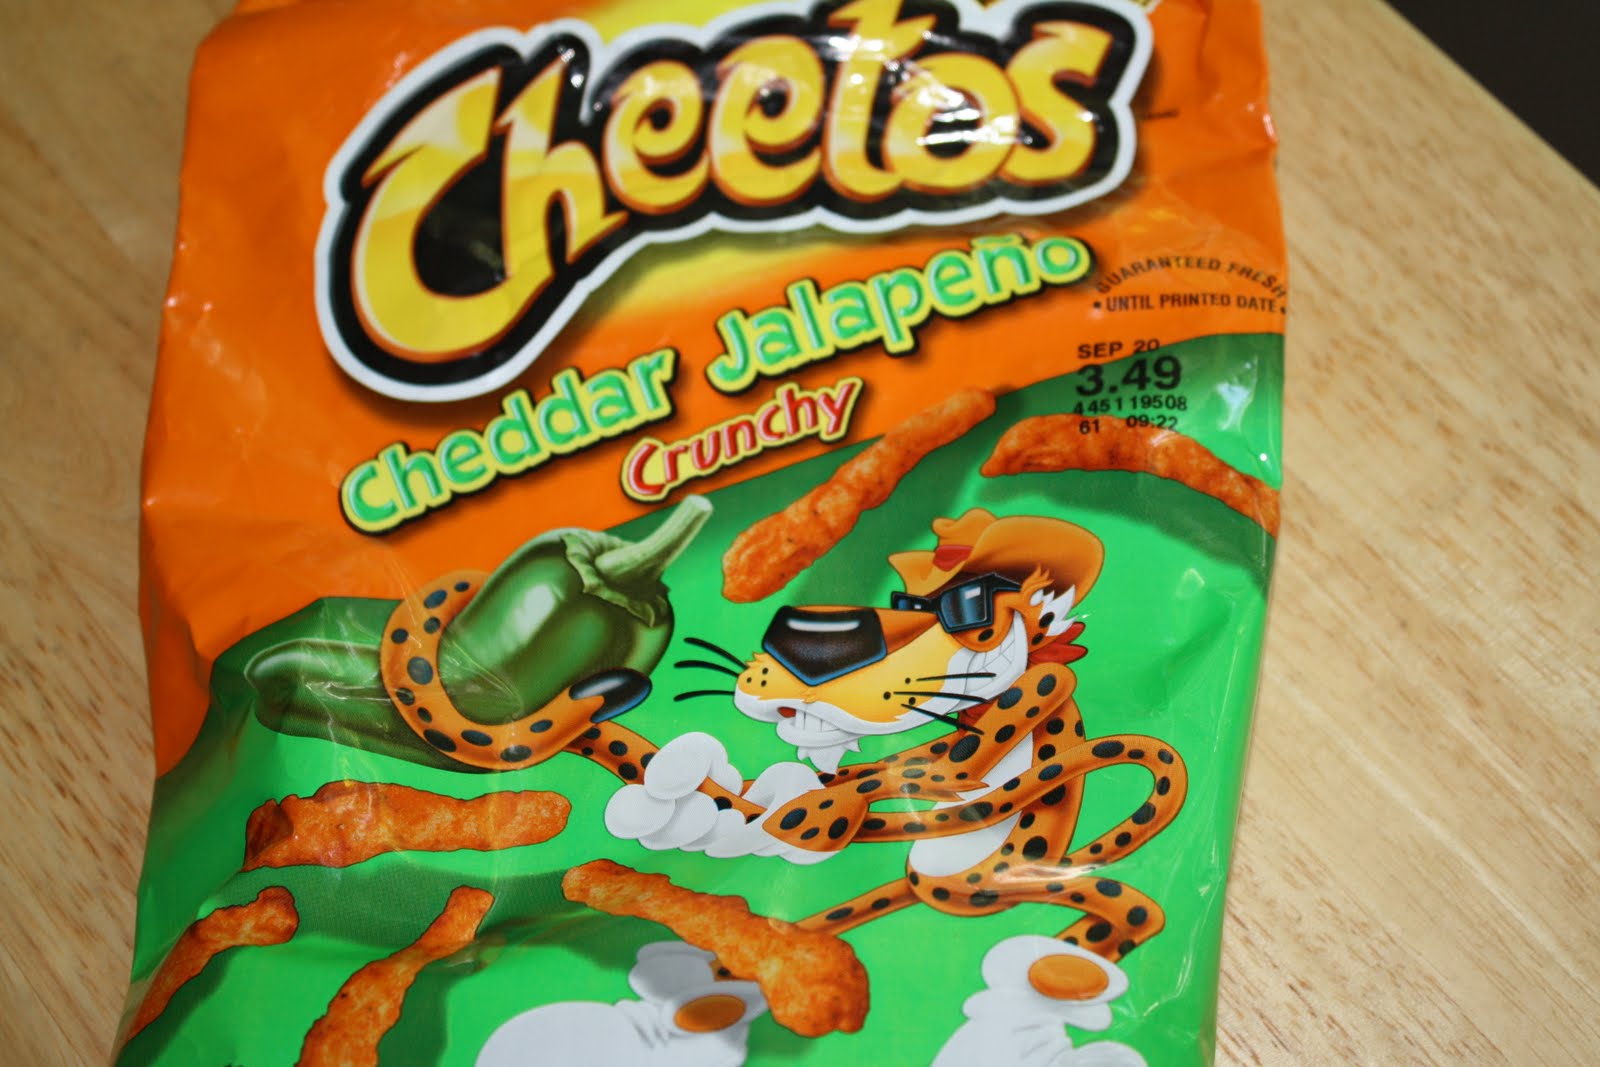 Cheddar Jalapeno Cheetos...why not? 